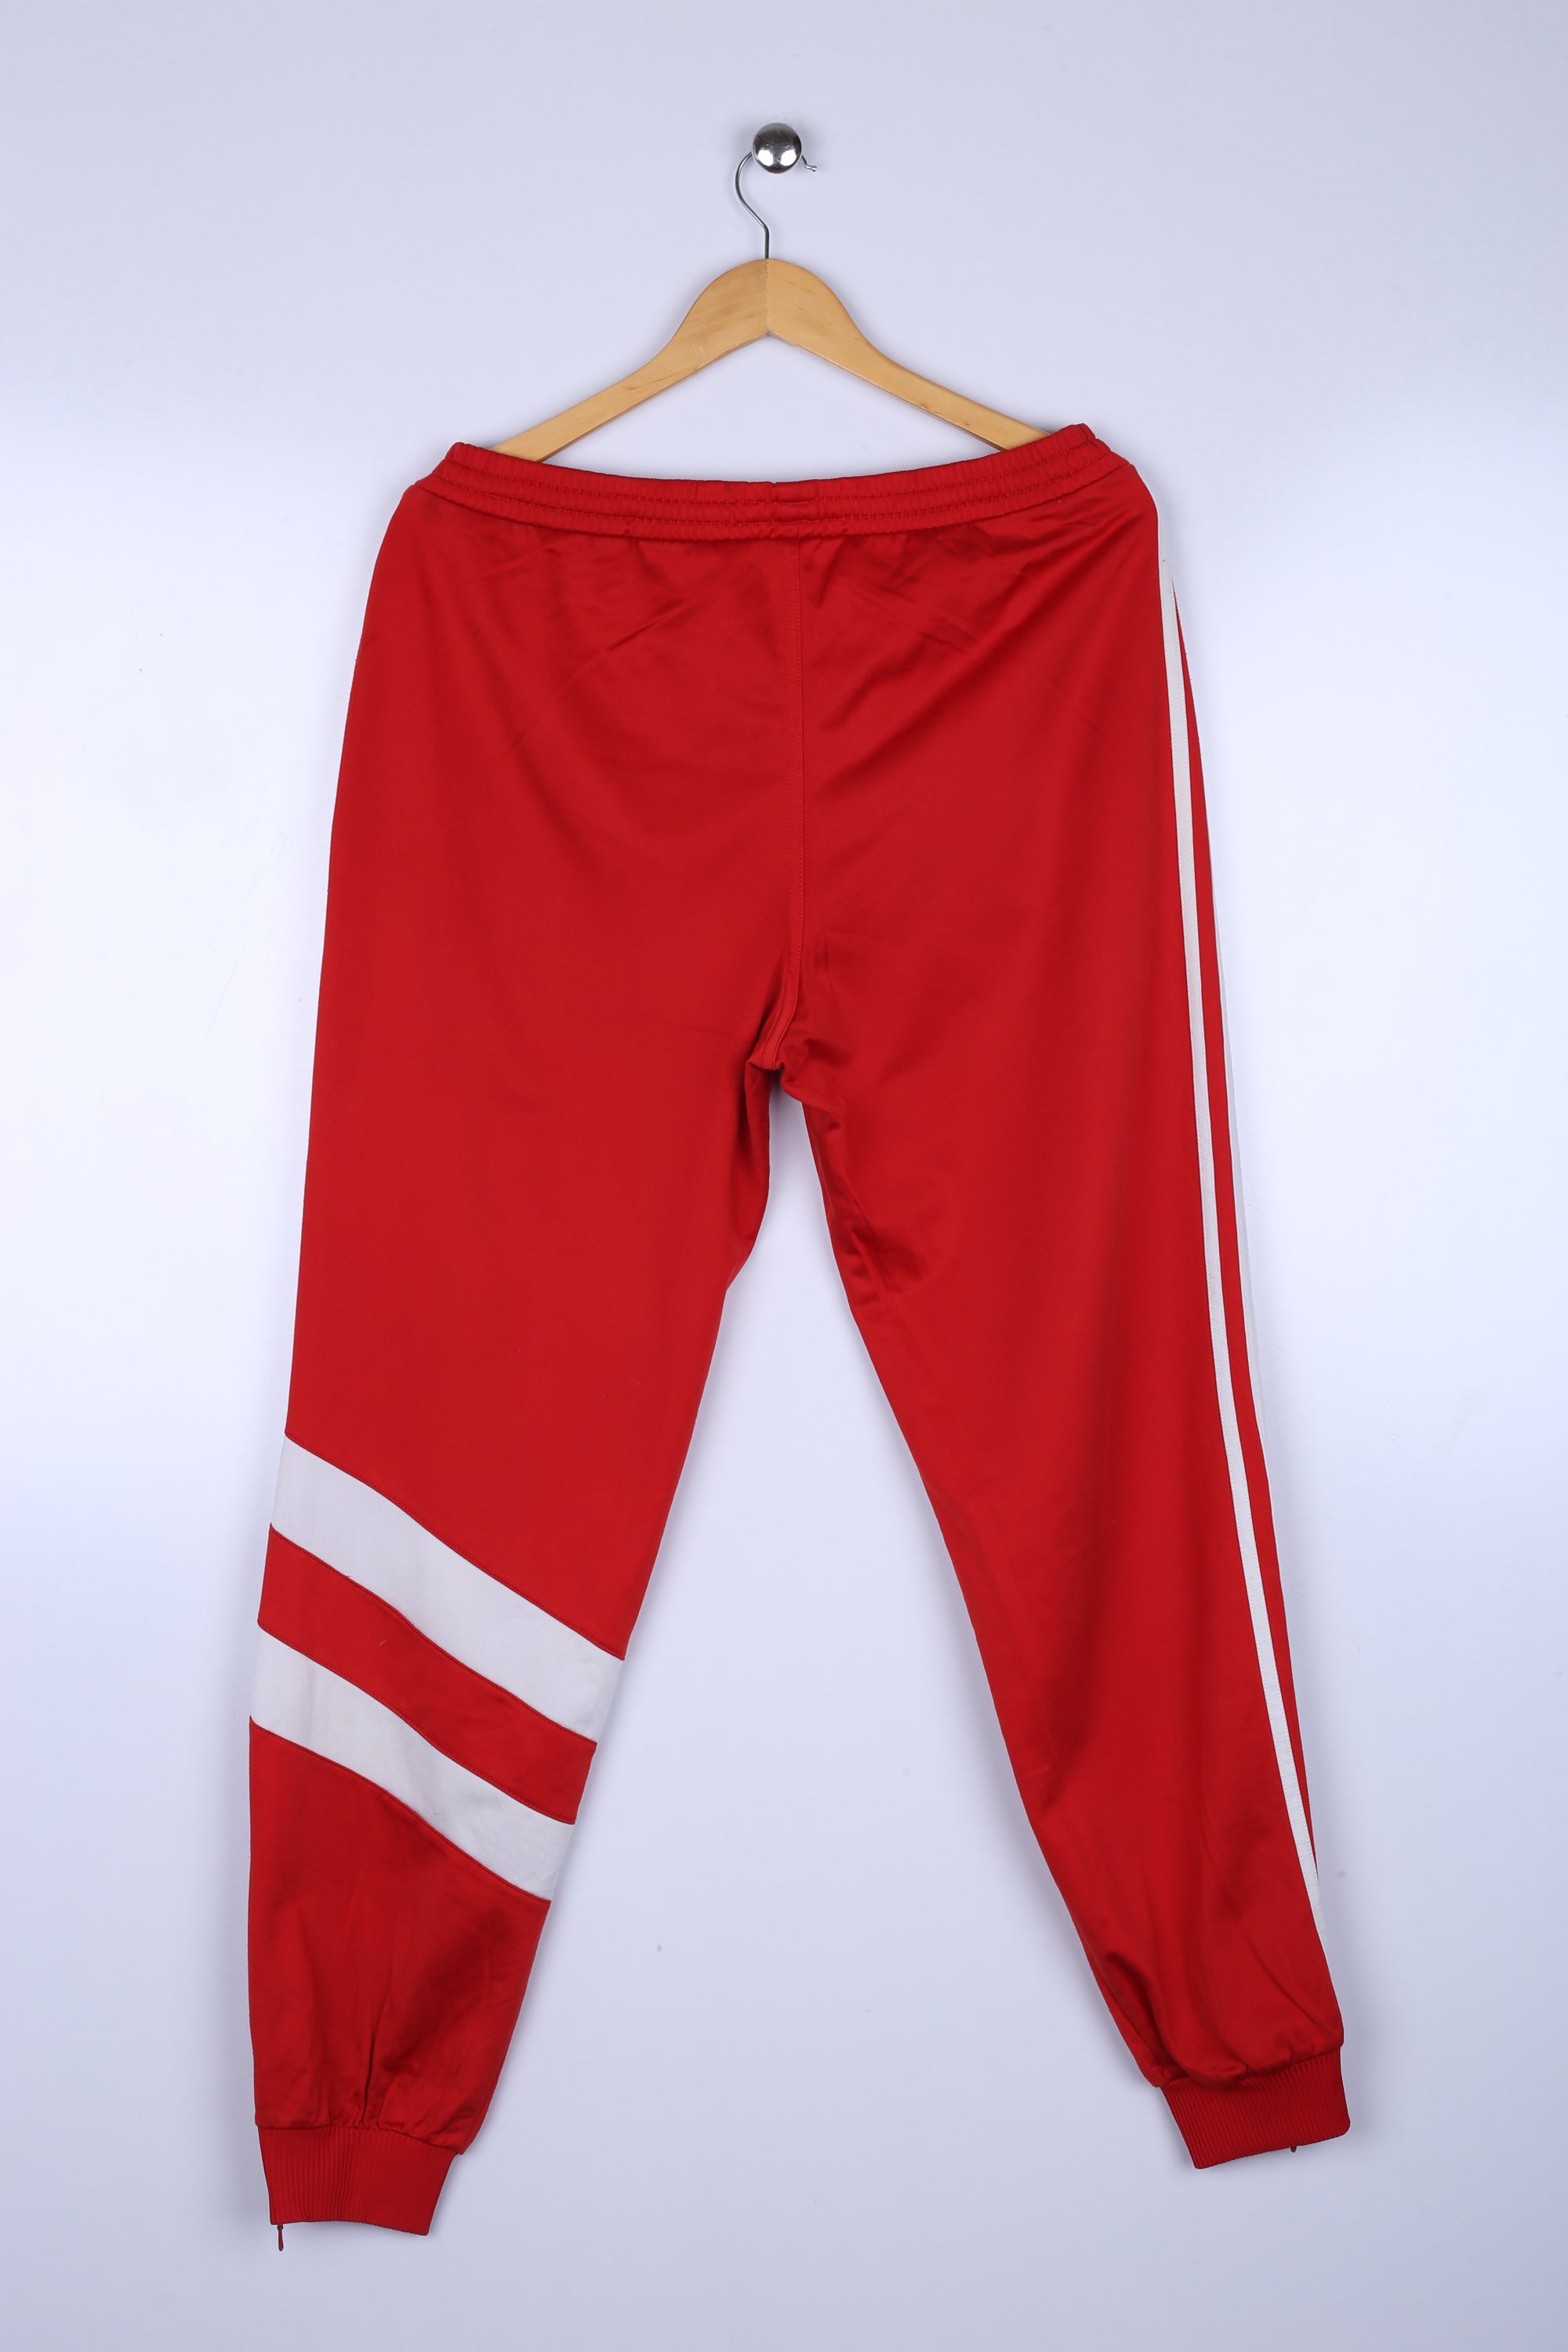 Vintage 90's Adidas Trouser Red